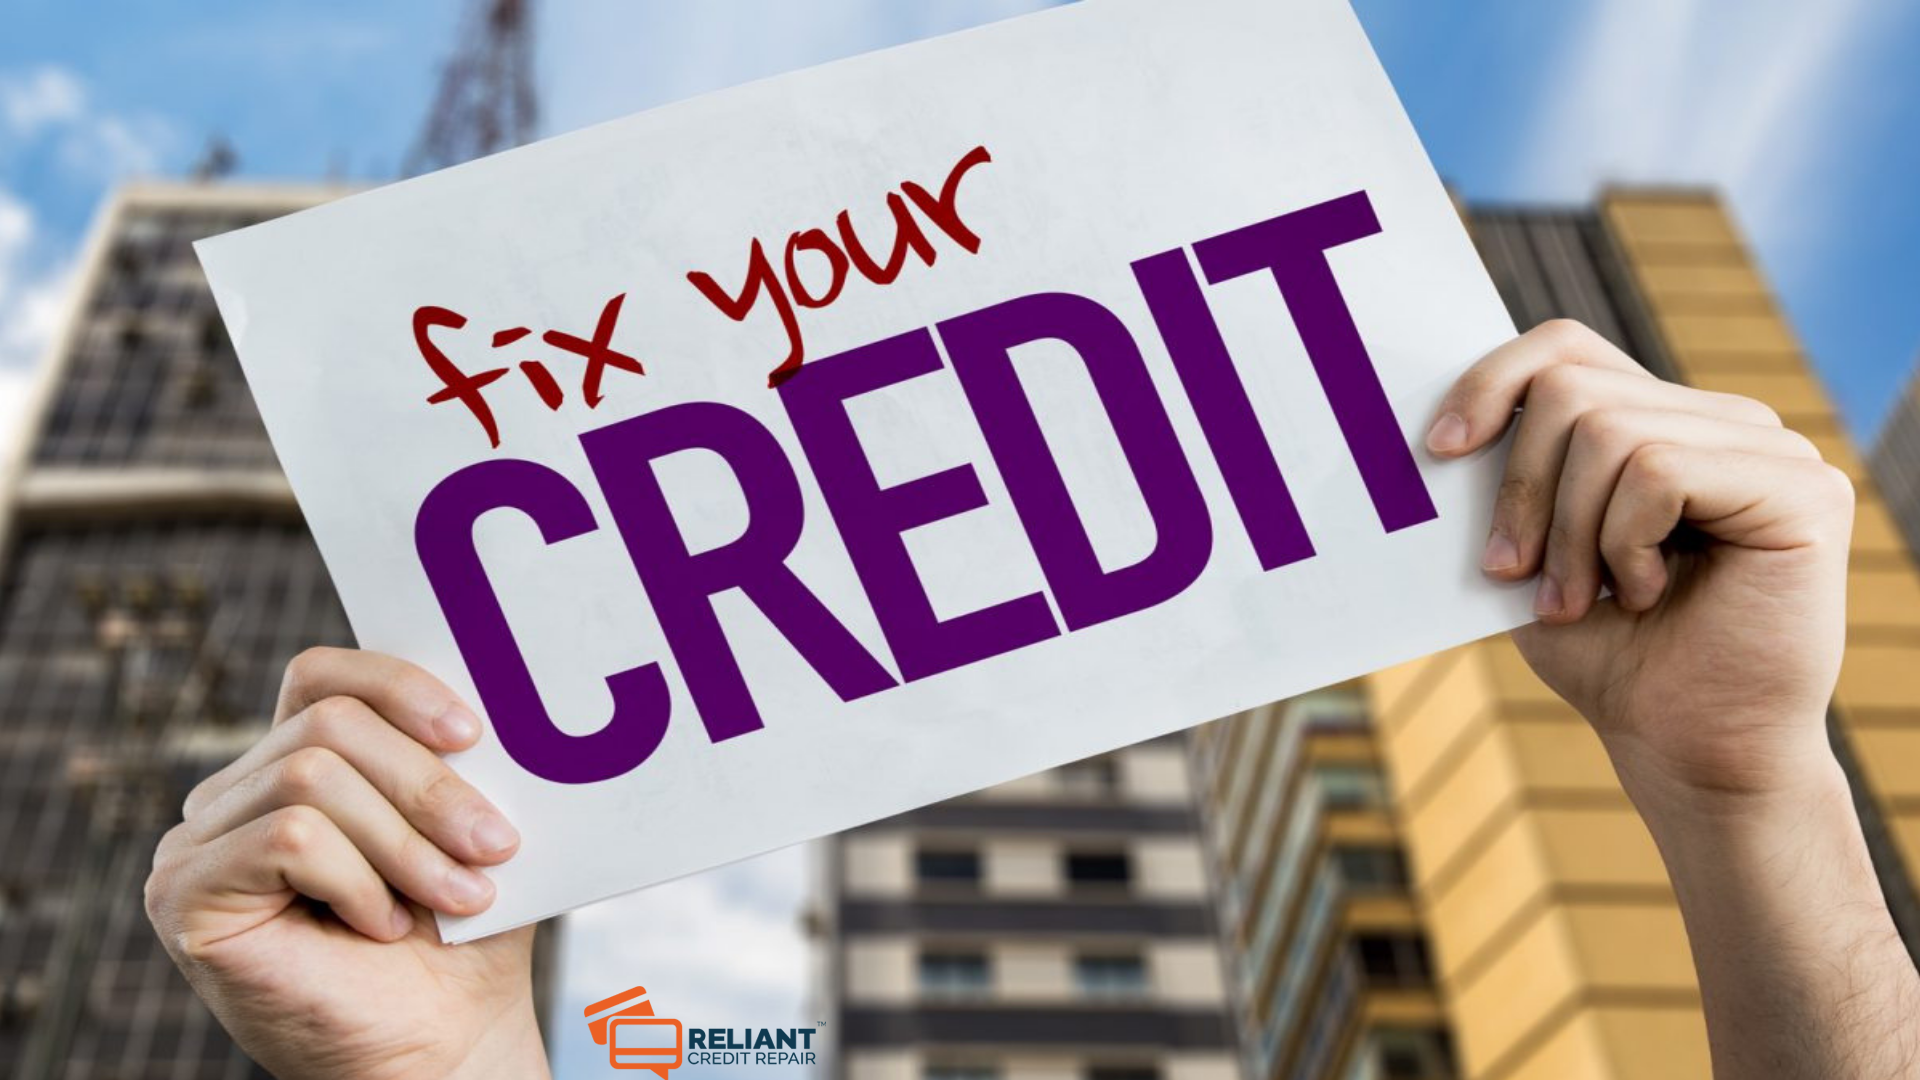 Three Simple Ways To Use My Credit Repair Tips And Save Thousands!